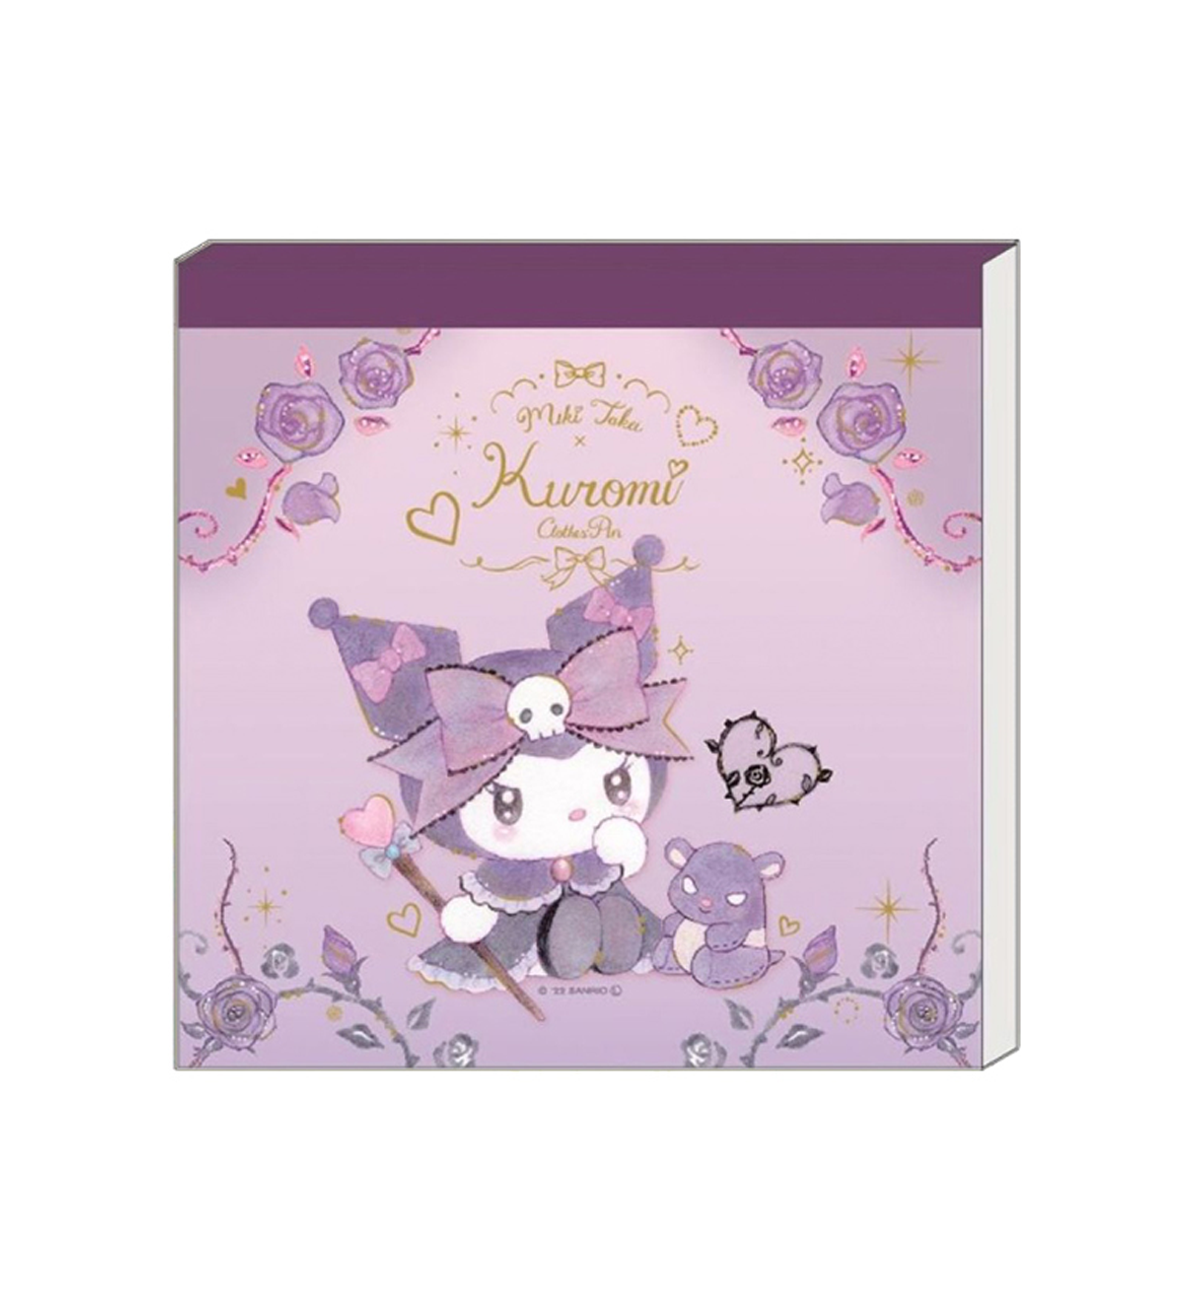 sanrio daily ✨ on X: kuromi notebooks 💫 which one are you getting?   / X